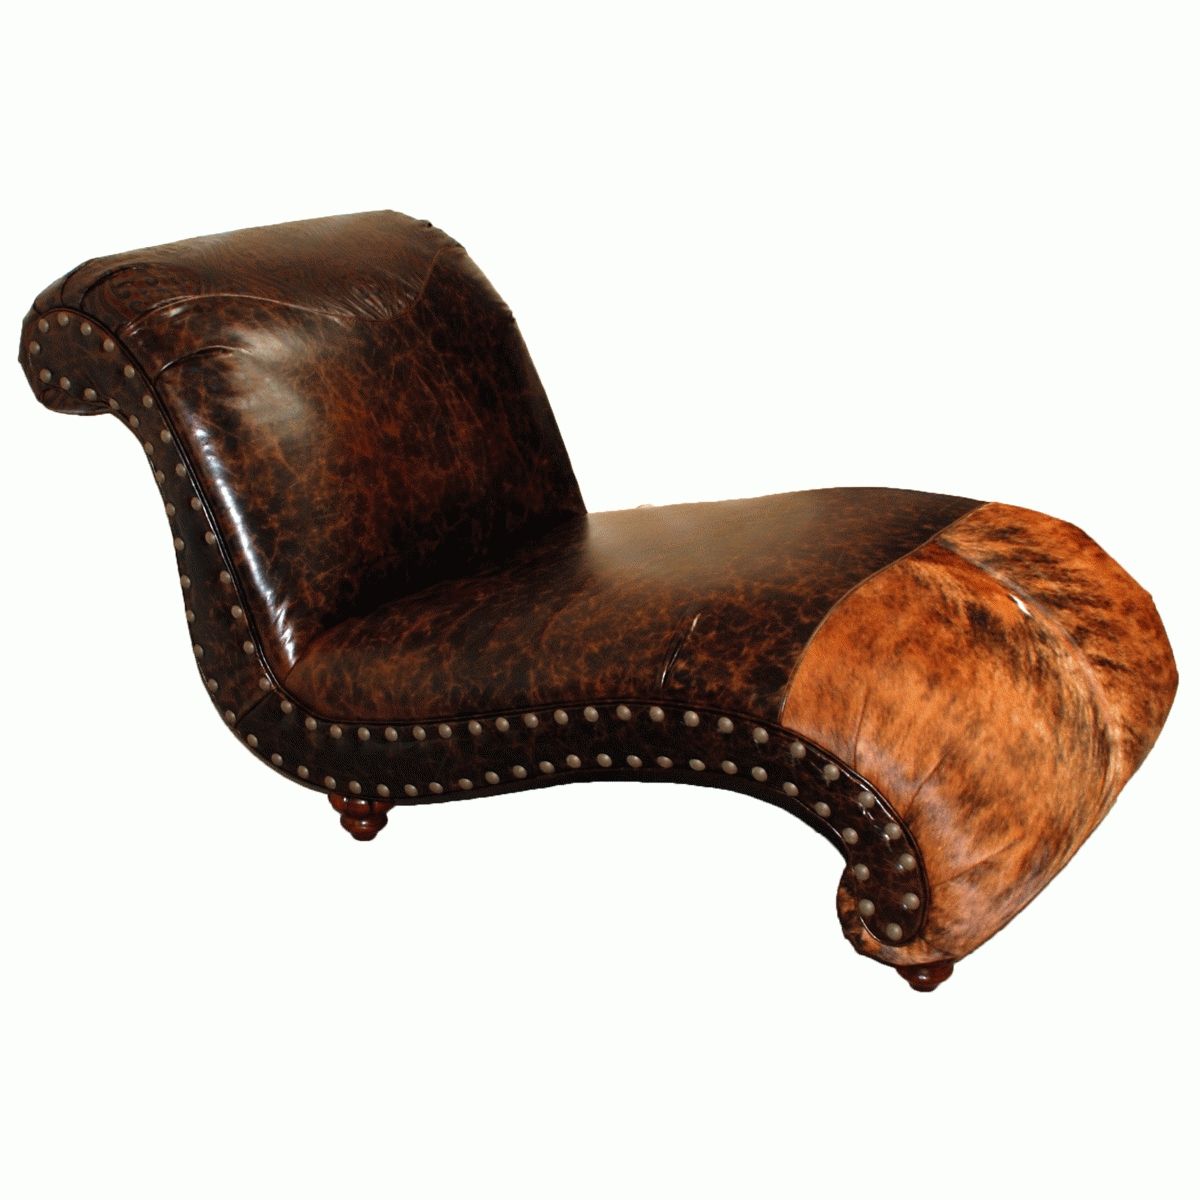 Brown Leather Chaise Lounges For Current Hill Country Chaise Lounge (View 4 of 15)